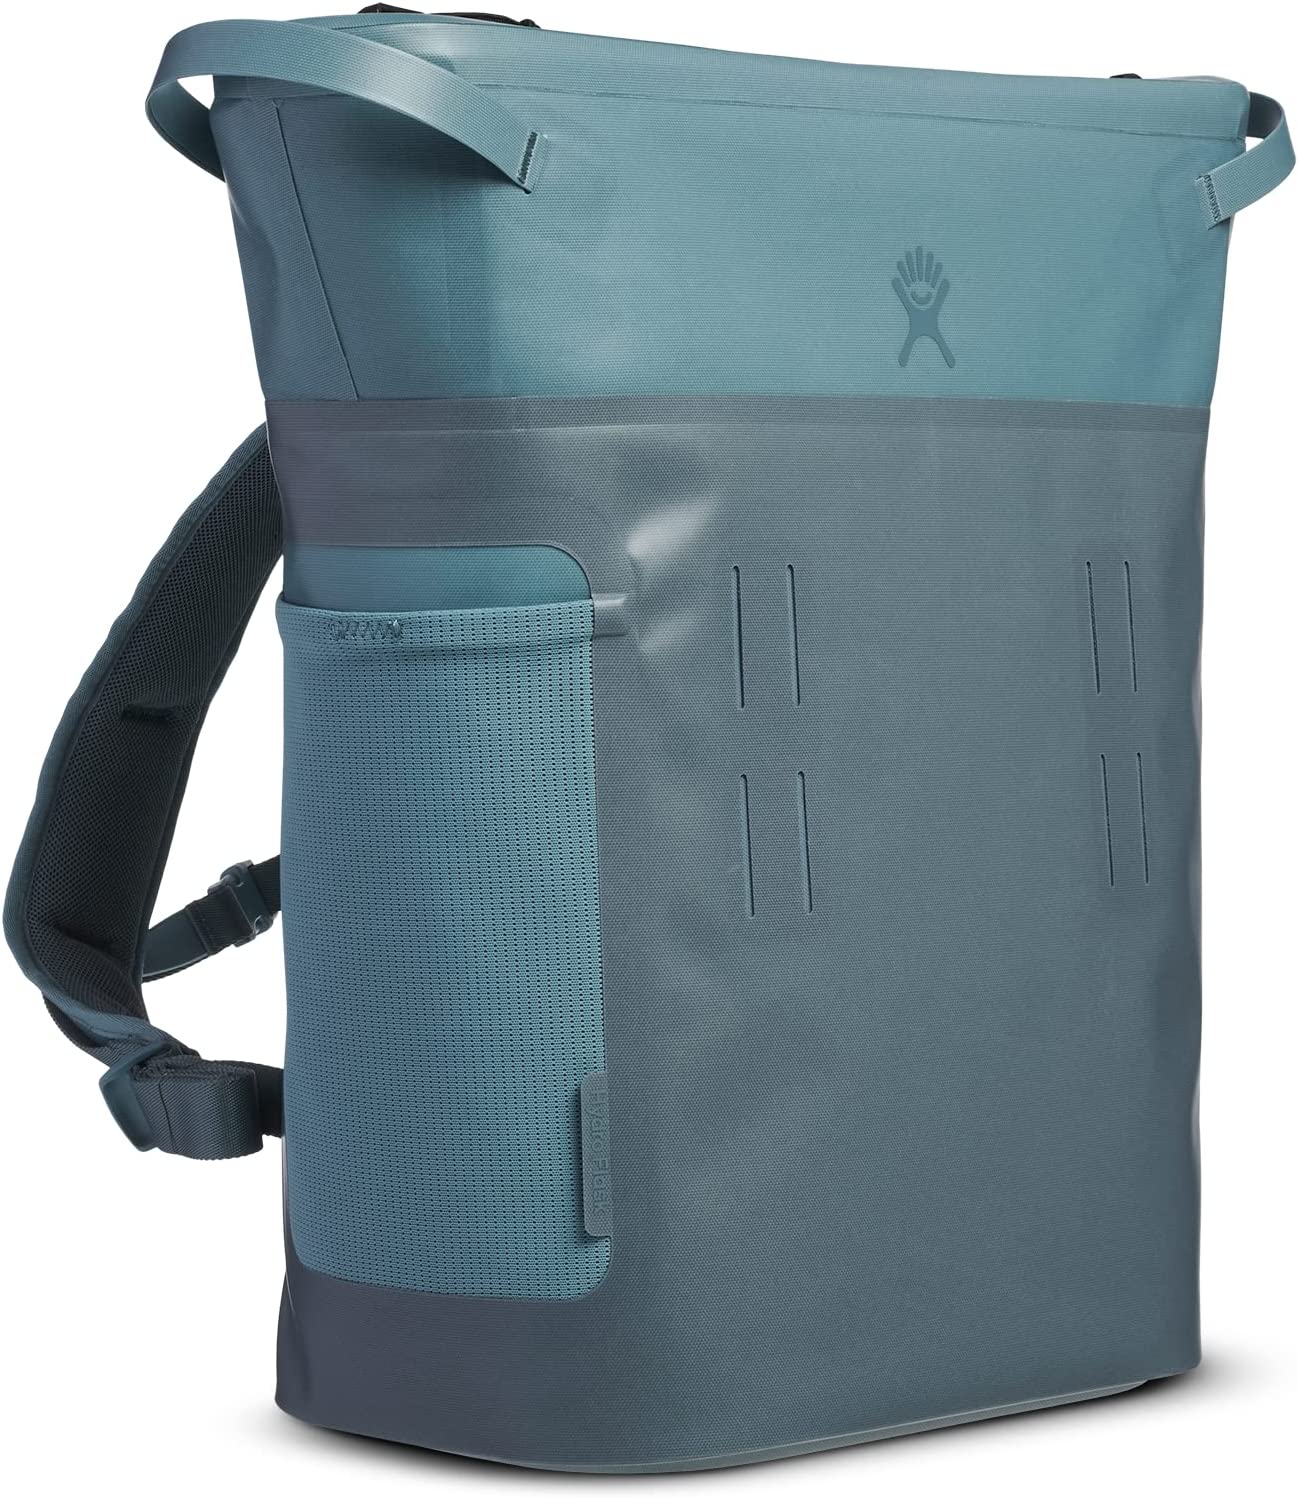 Booe 30L Waterproof Insulated Tote - Fully Submersible Soft Cooler